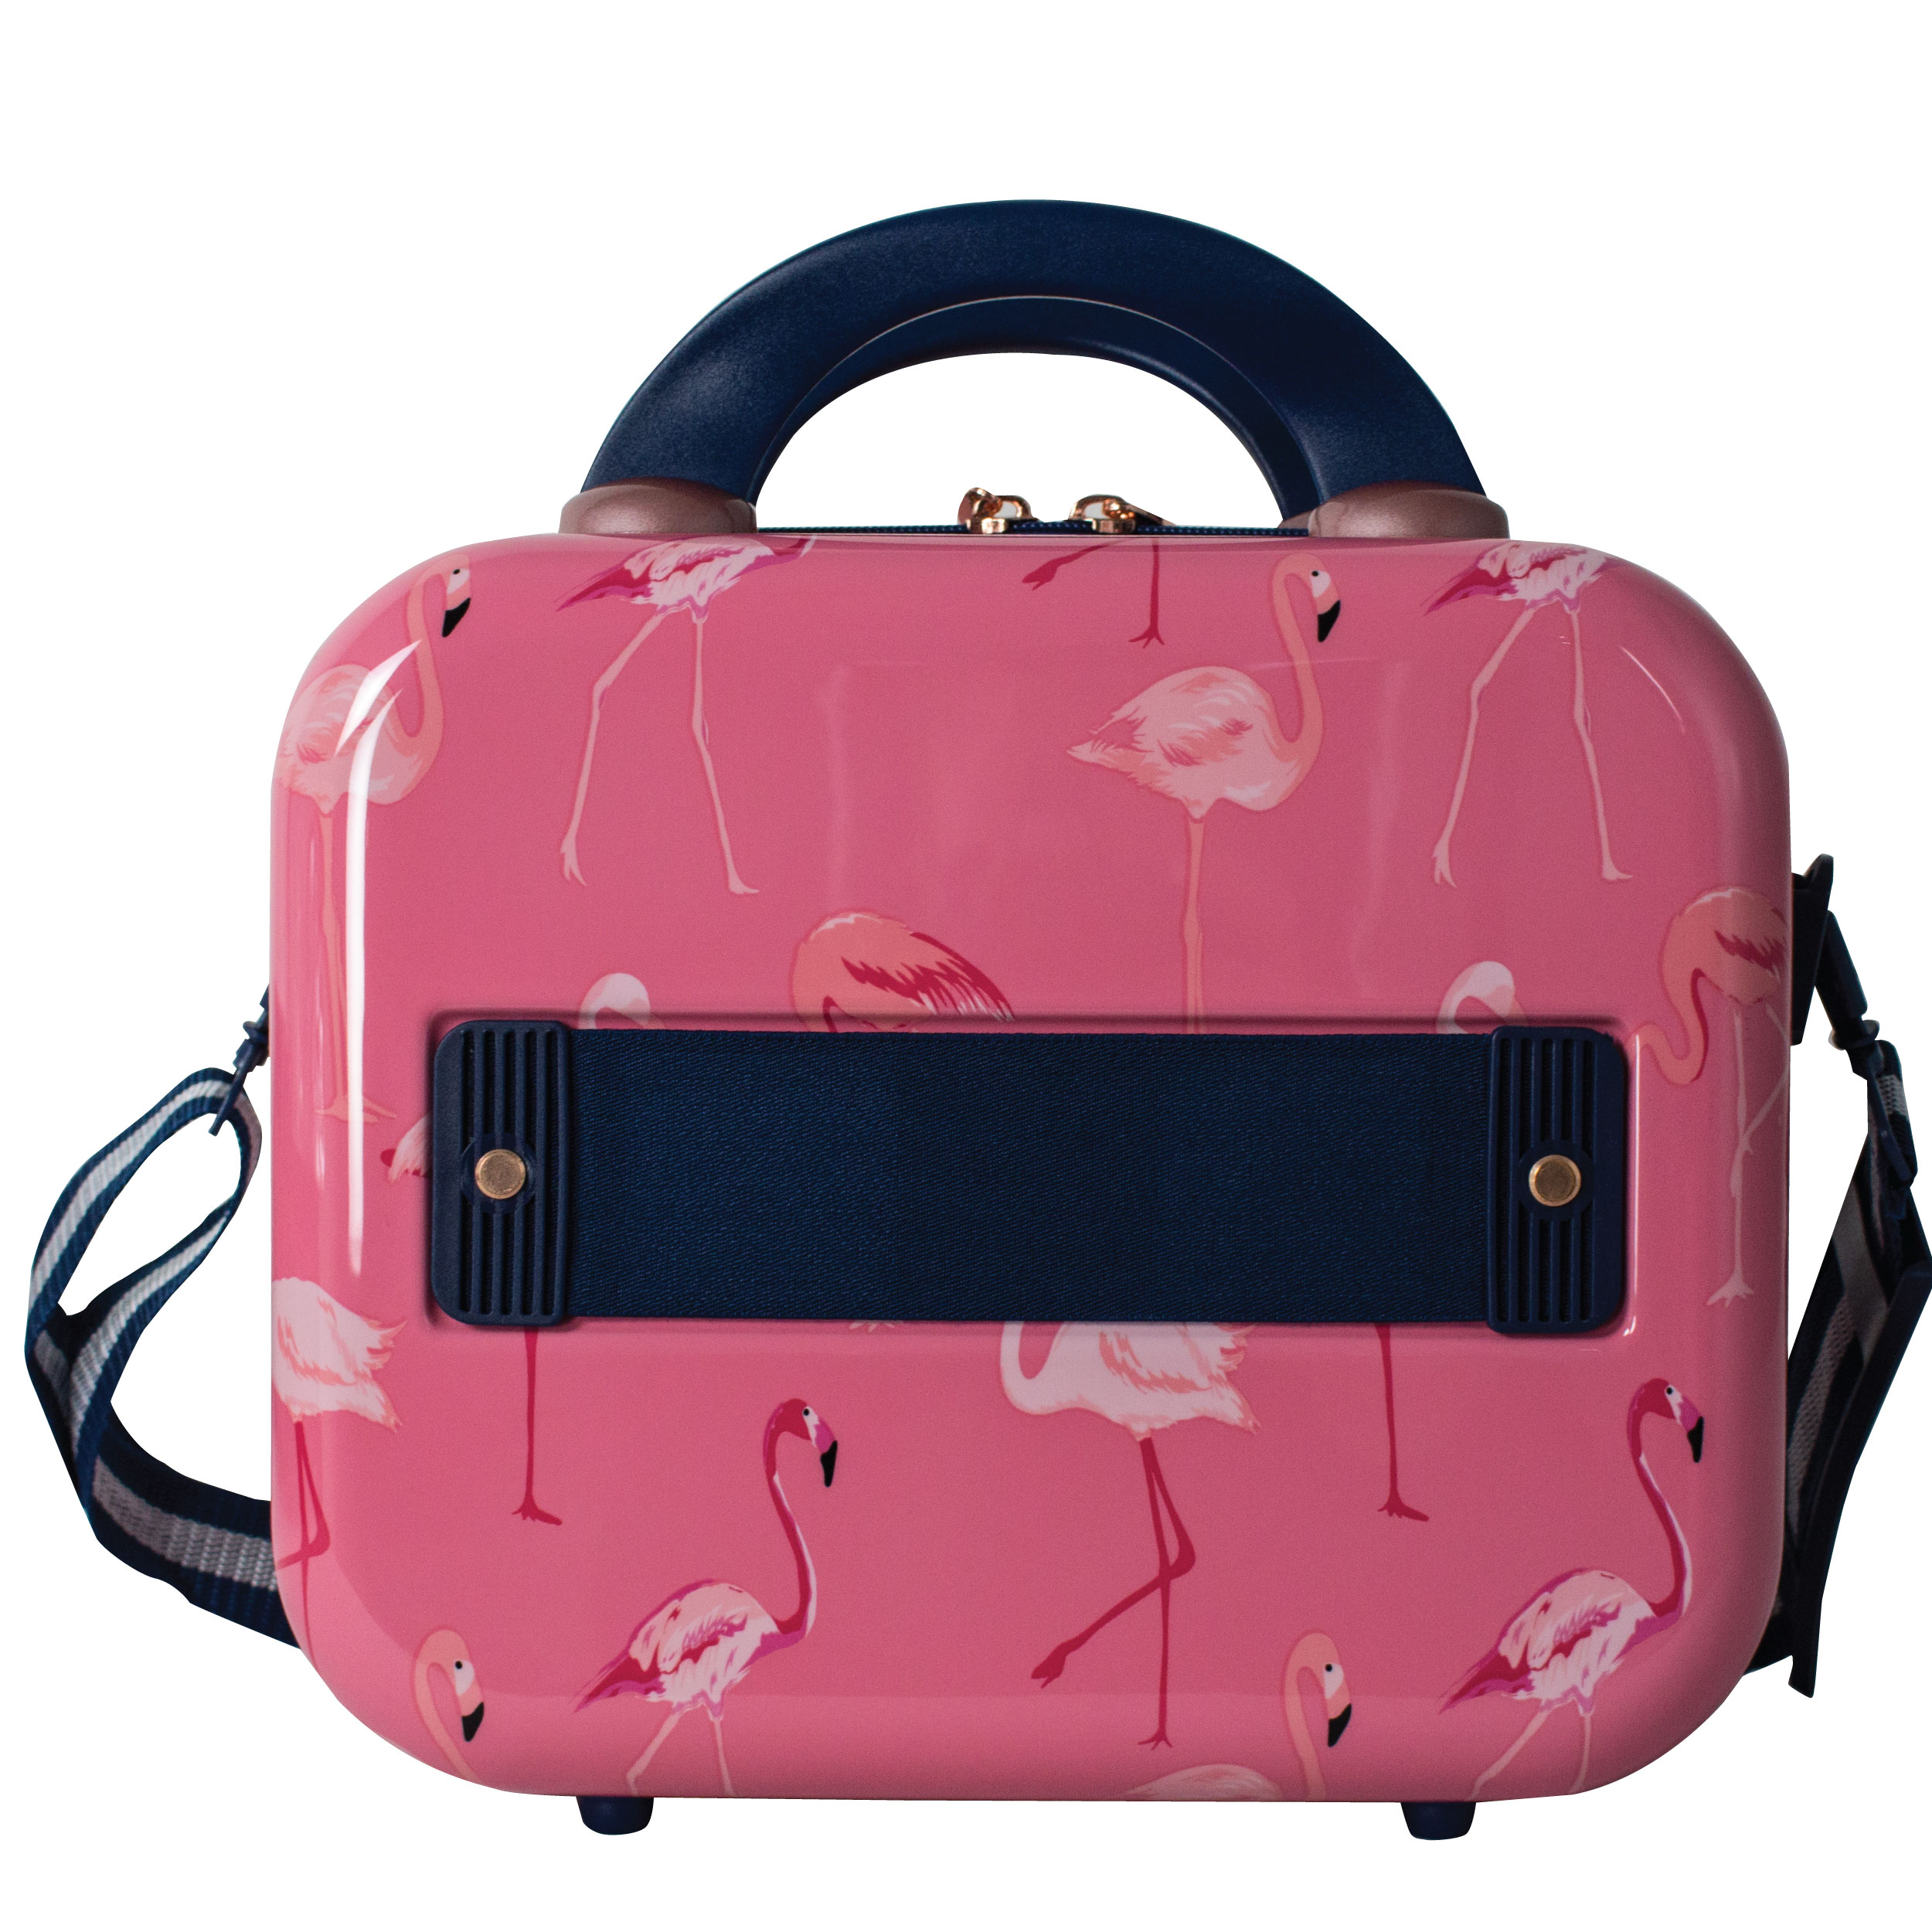 CHP-903 FLAMINGO 2-Piece Luggage & Beauty Case - Chariot Travelware